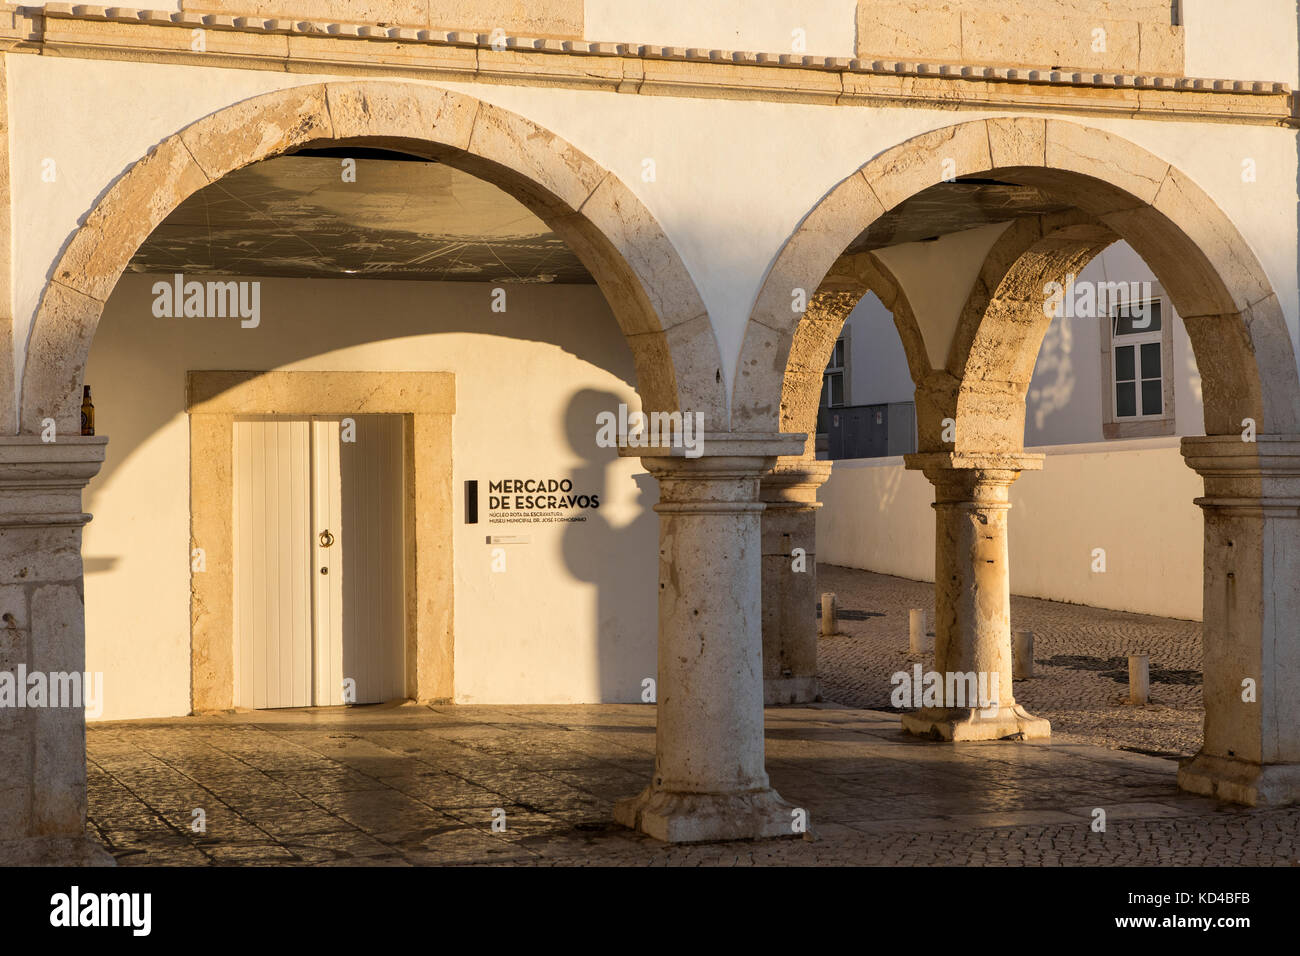 LAGOS, PORTUGAL - SEPTEMBER 18TH 2017: A view of the Mercado De Escravos - the Slave Market Museum, located in the historic old town of Lagos, Portuga Stock Photo